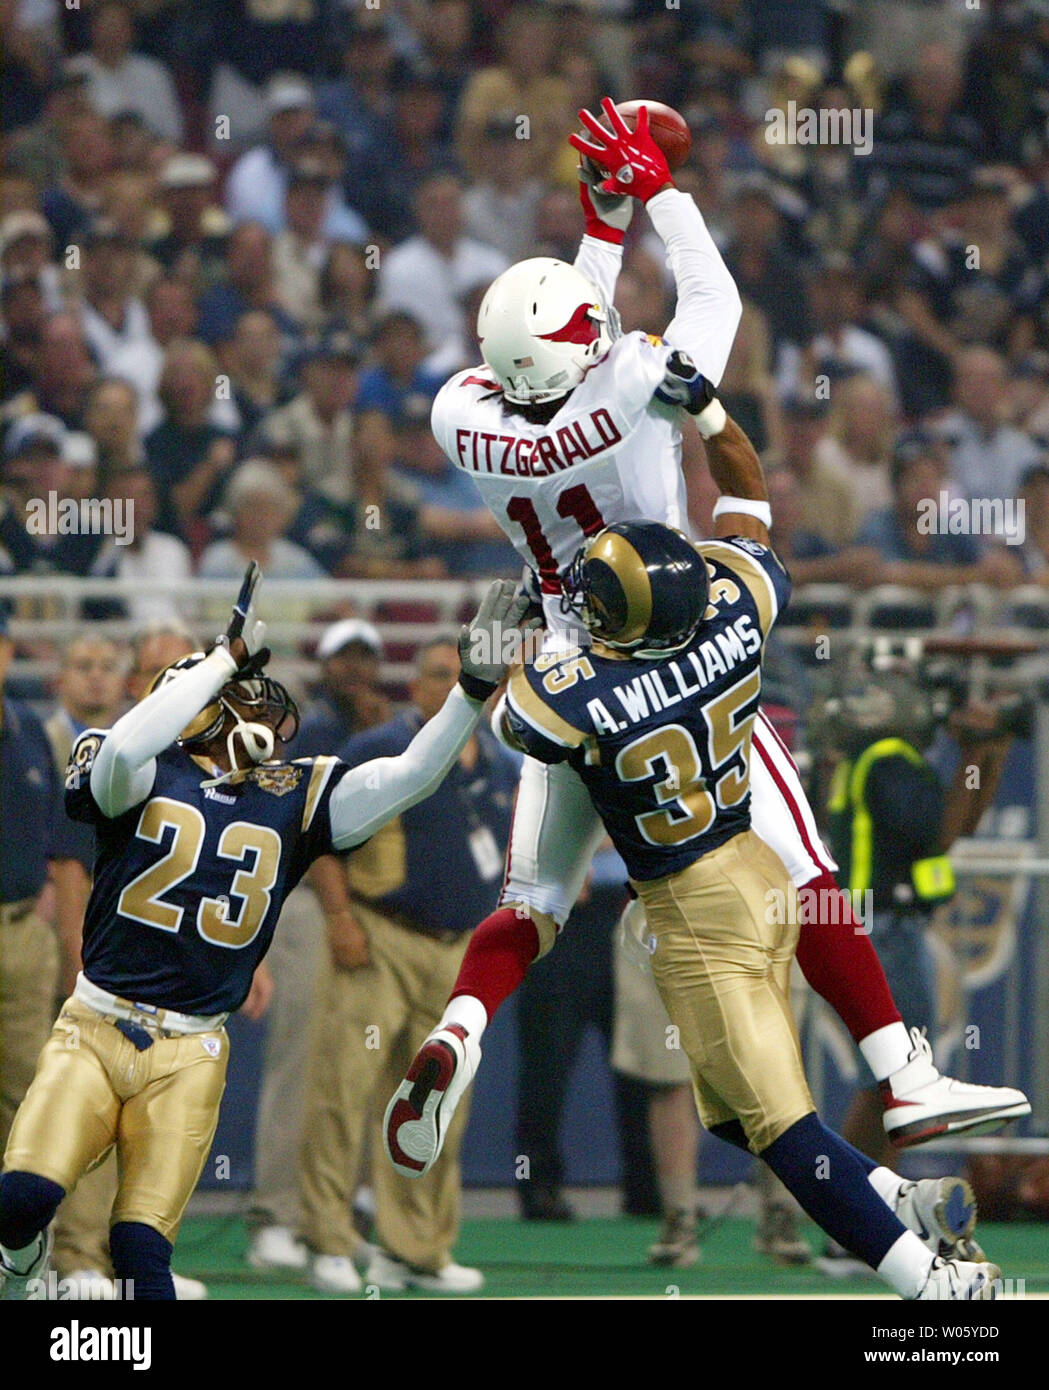 https://c8.alamy.com/comp/W05YDD/arizona-cardinals-larry-fitzgerald-jumps-to-catch-the-football-for-a-37-yard-gain-in-front-of-st-louis-rams-aeneas-williams-35-and-jerametius-butler-23-for-the-first-play-of-the-game-at-the-edward-jones-dome-in-st-louis-on-september-12-2004-upi-photobill-greenblatt-W05YDD.jpg